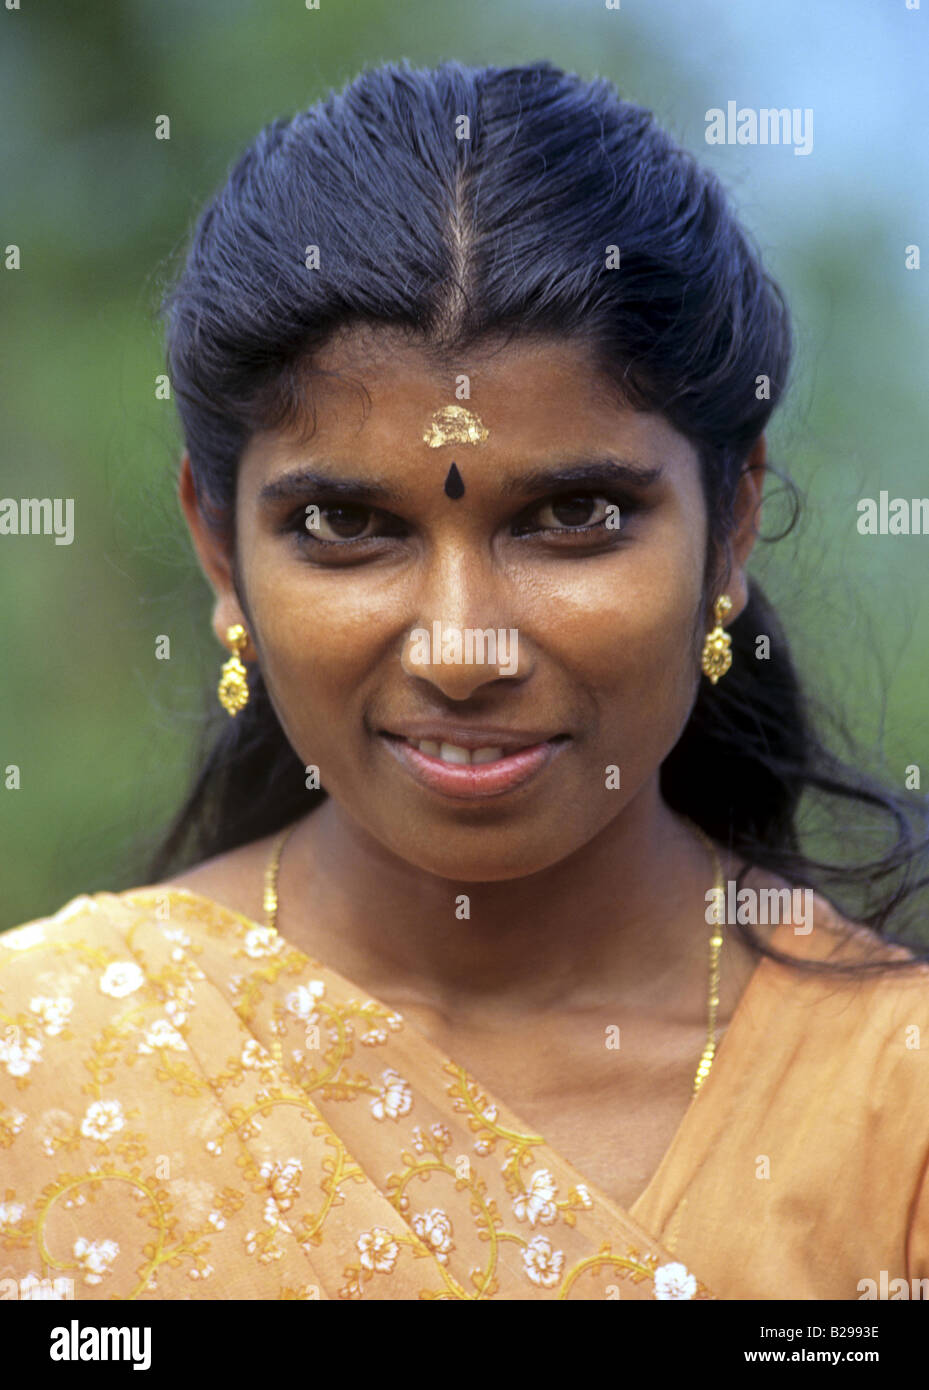 Local Lady Goa State India Date 15 06 2008 Ref ZB548 115573 0107 COMPULSORY CREDIT World Pictures Photoshot Stock Photo